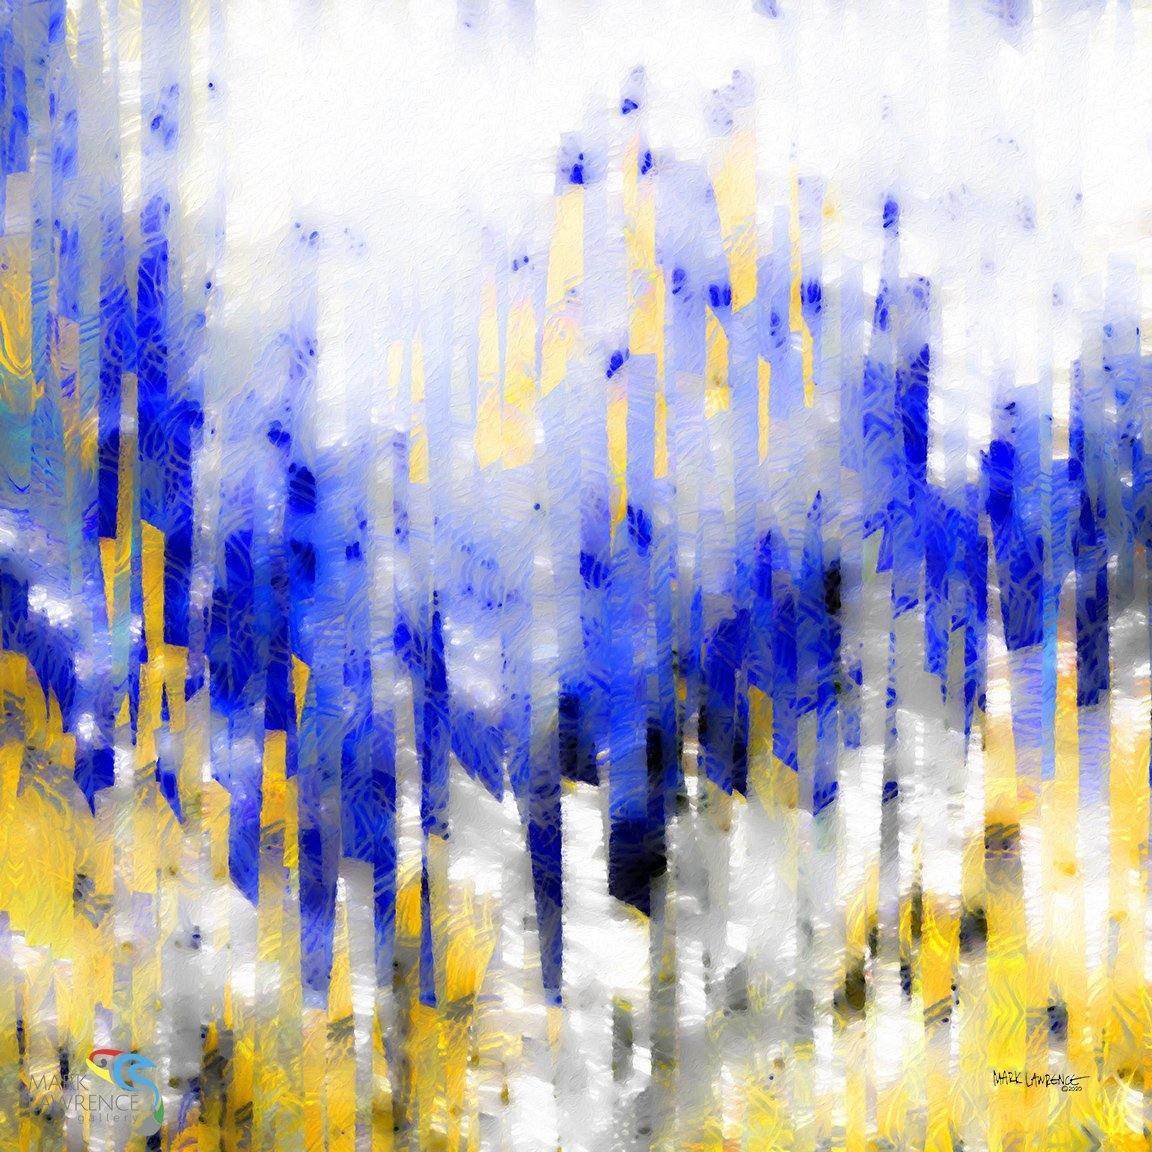 Psalm 34:17. The Lord Hears. Limited Edition Christian Modern Art. Ultra-hand embellished and textured with rich brush strokes by the artist. Signed & numbered brightly colored Christian abstract art. Find Art That Speaks To You! The righteous cry out, and the Lord hears, and delivers them out of all their troubles. Psalm 34:17